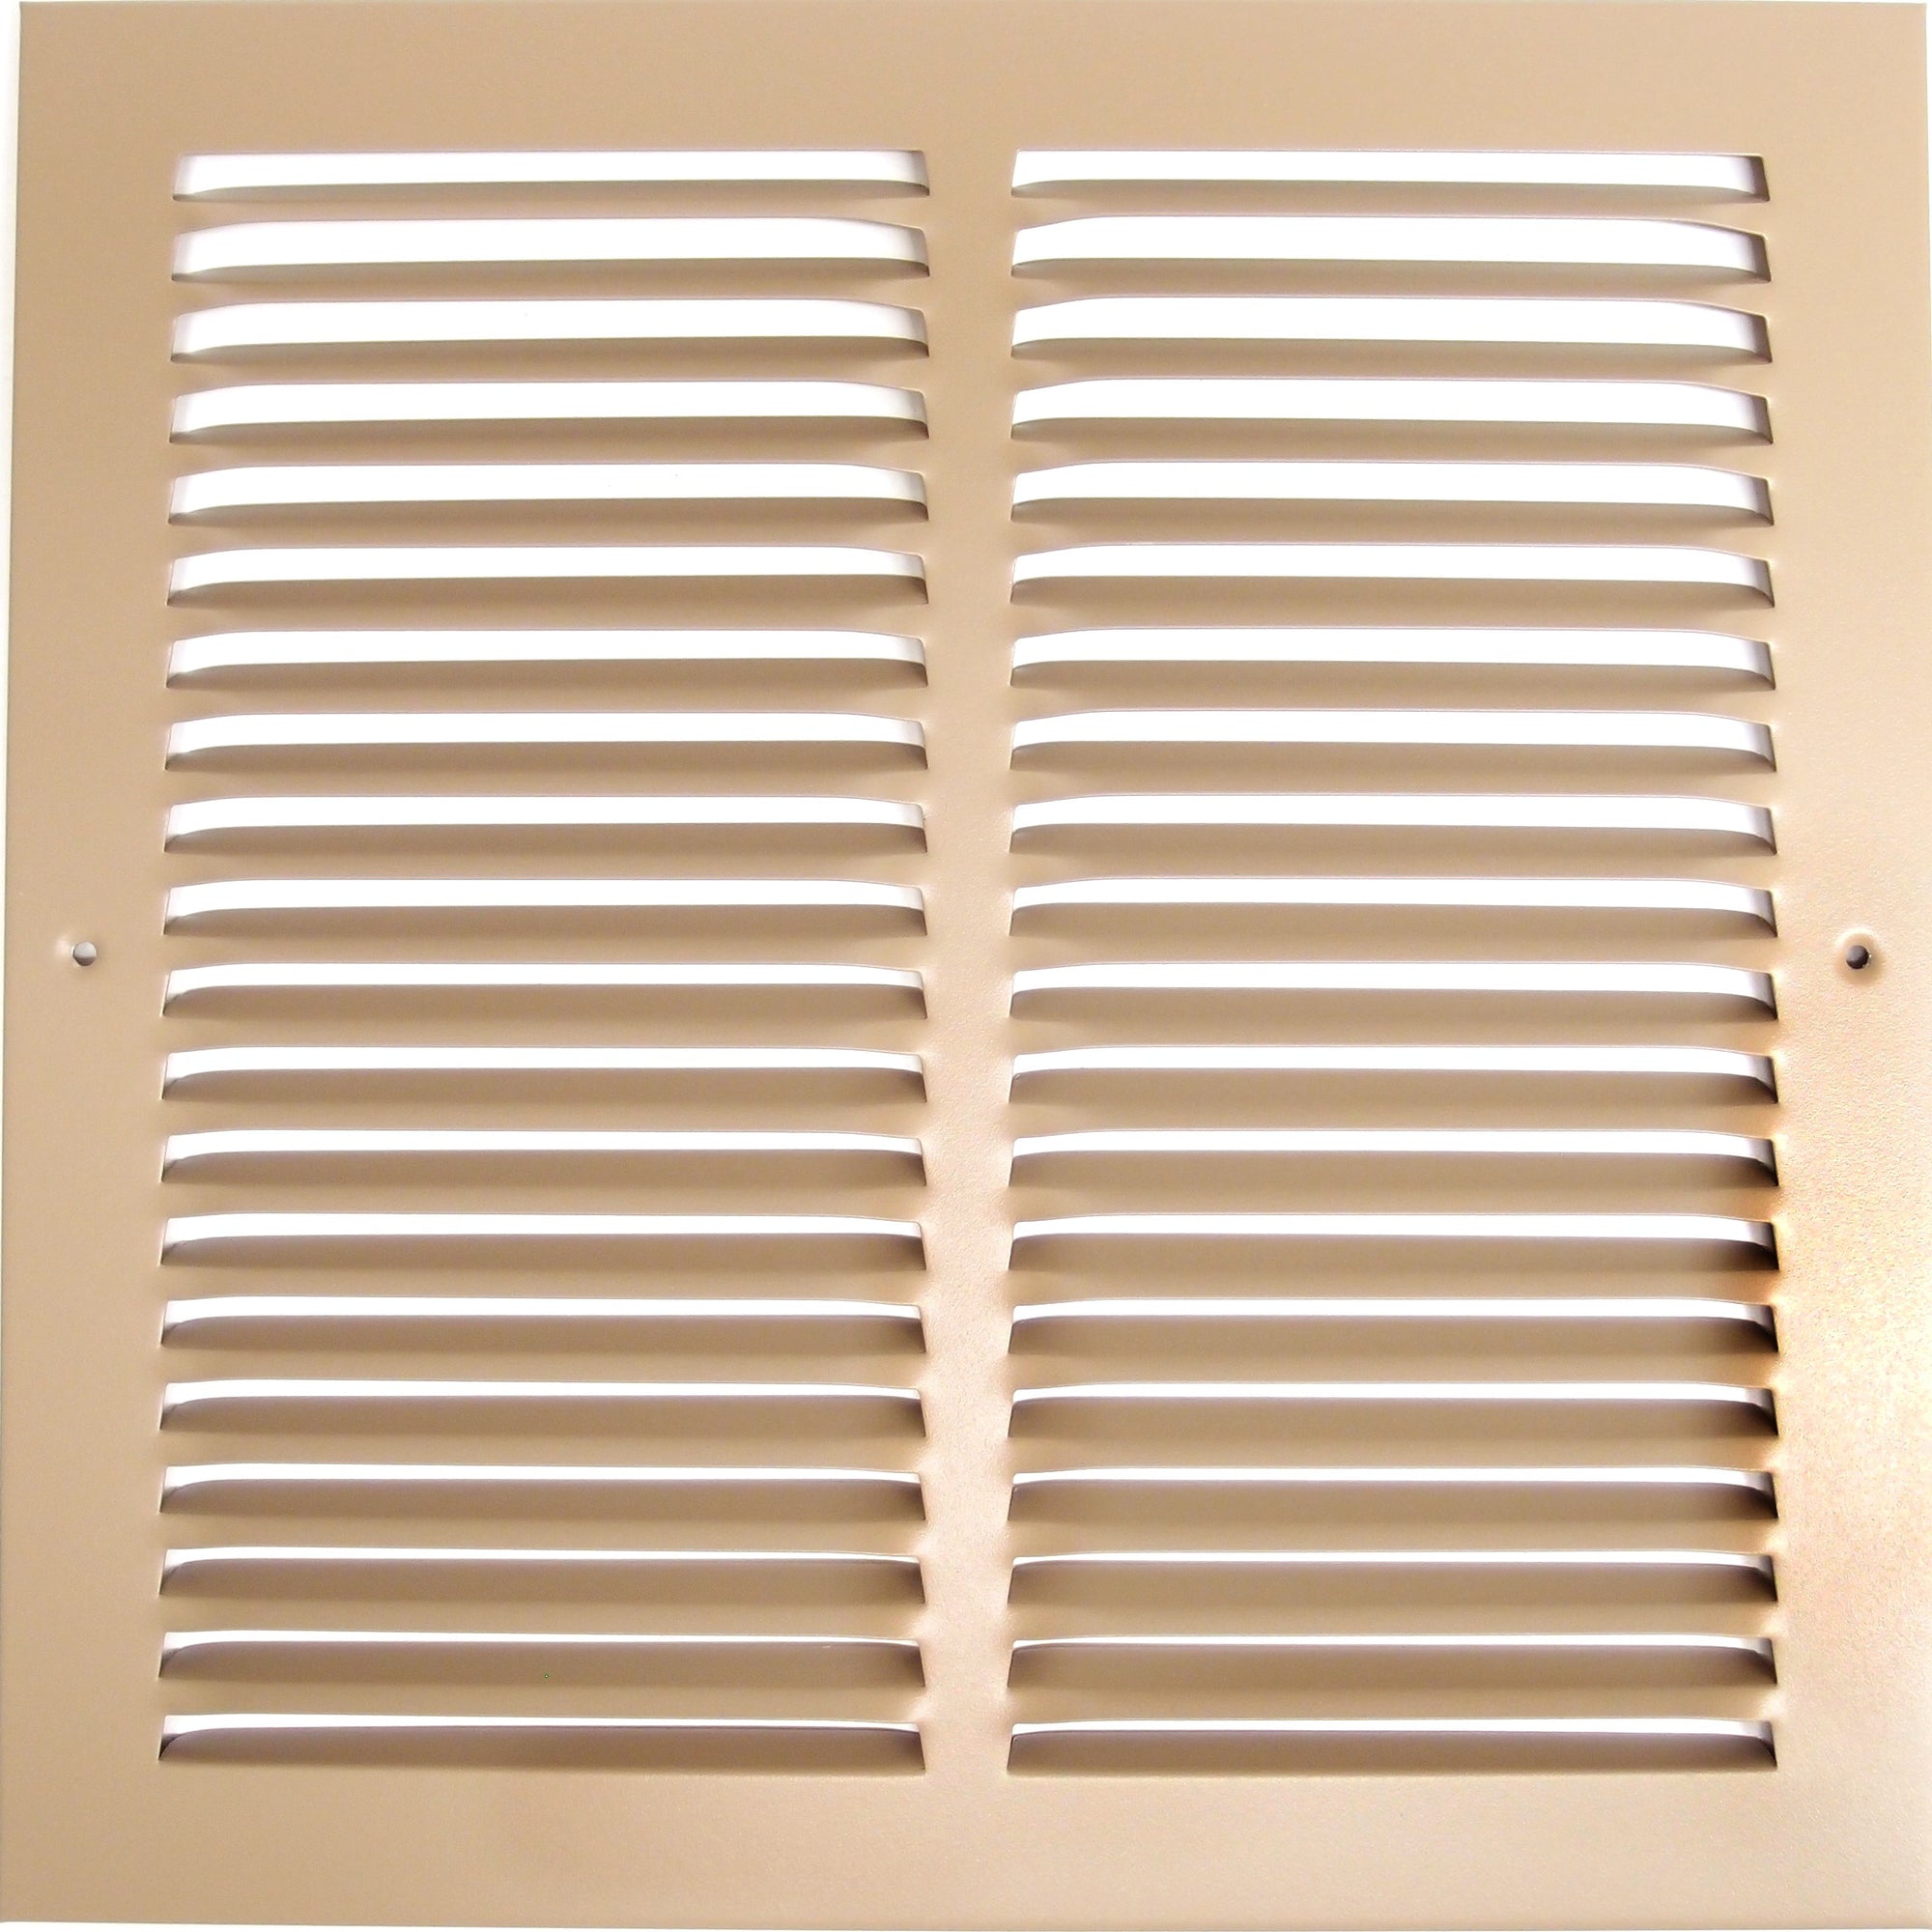 24" X 24" Air Vent Return Grilles - Sidewall and Ceiling - Steel